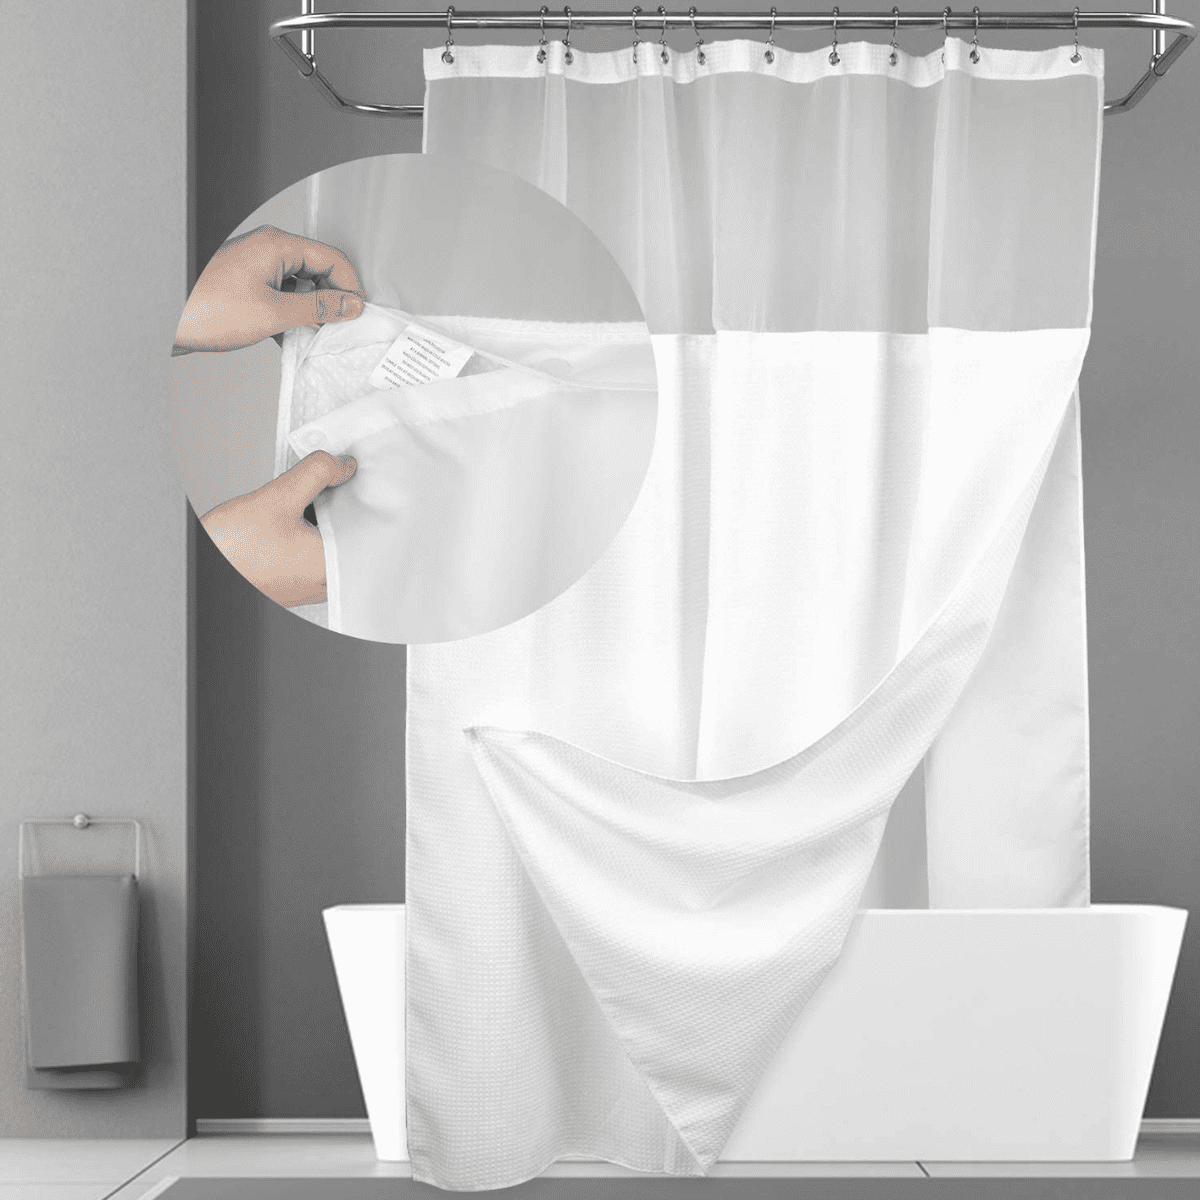 Why I Love the N&Y Home Shower Curtain with Snap-In Liner: Tried